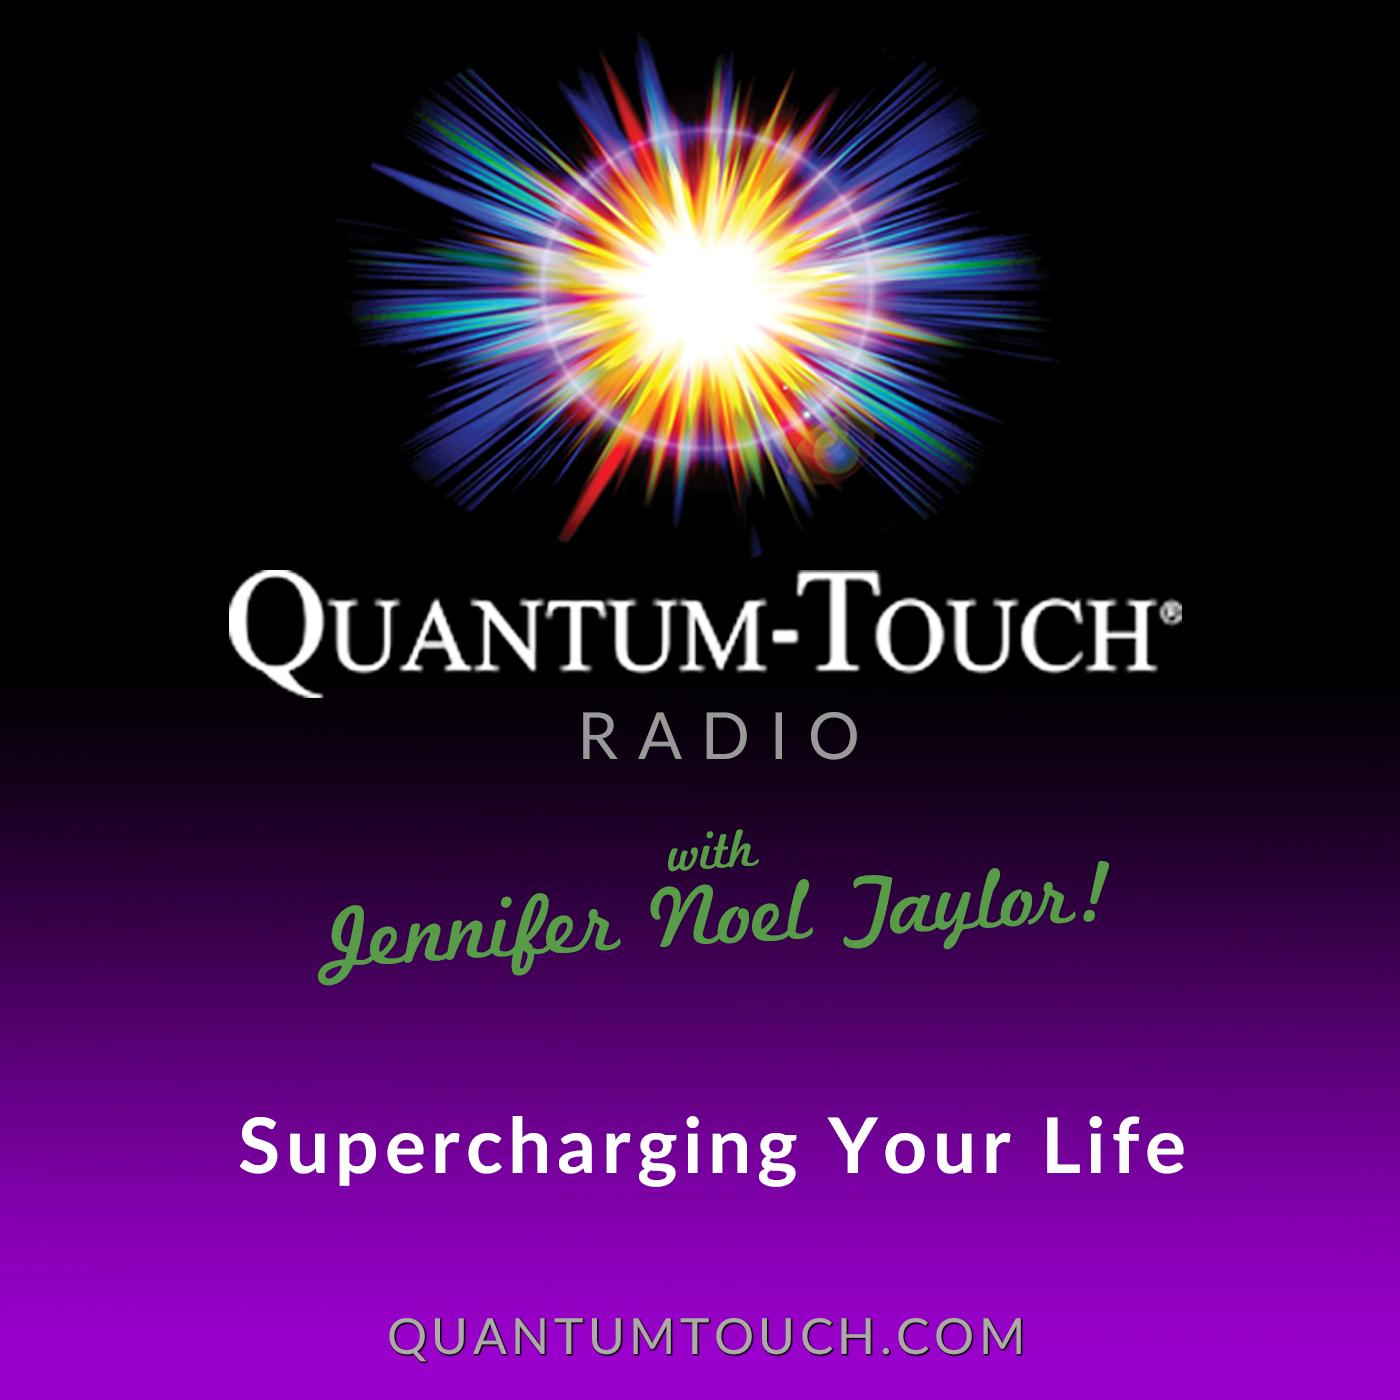 Encore: Interview with Richard Gordon, Founder of Quantum-Touch 